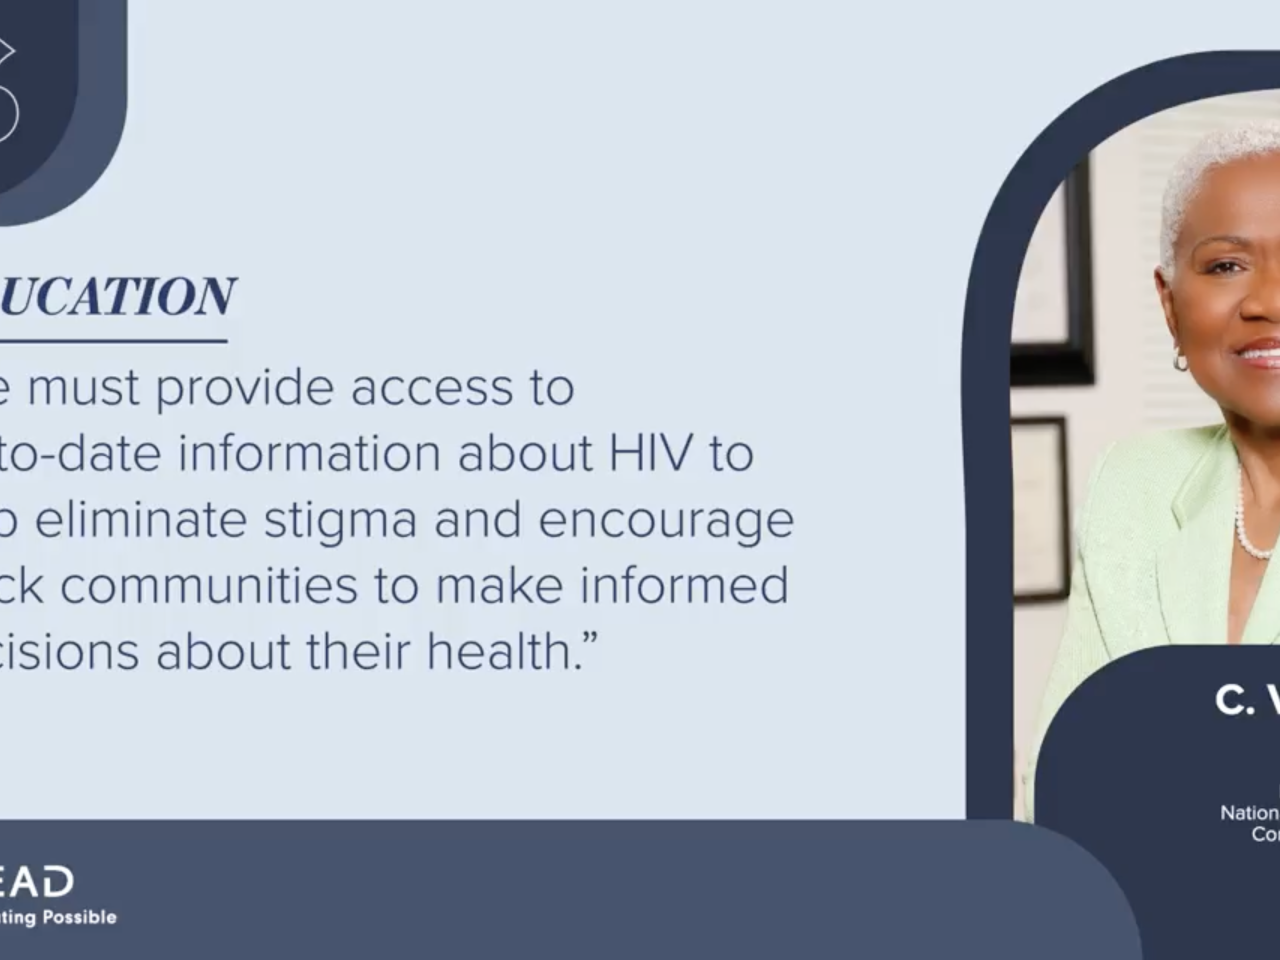 EDUCATION "We must provide access to up-to-date information about HIV to help eliminate stigma and encourage Black communities to make informed decisions about their health."